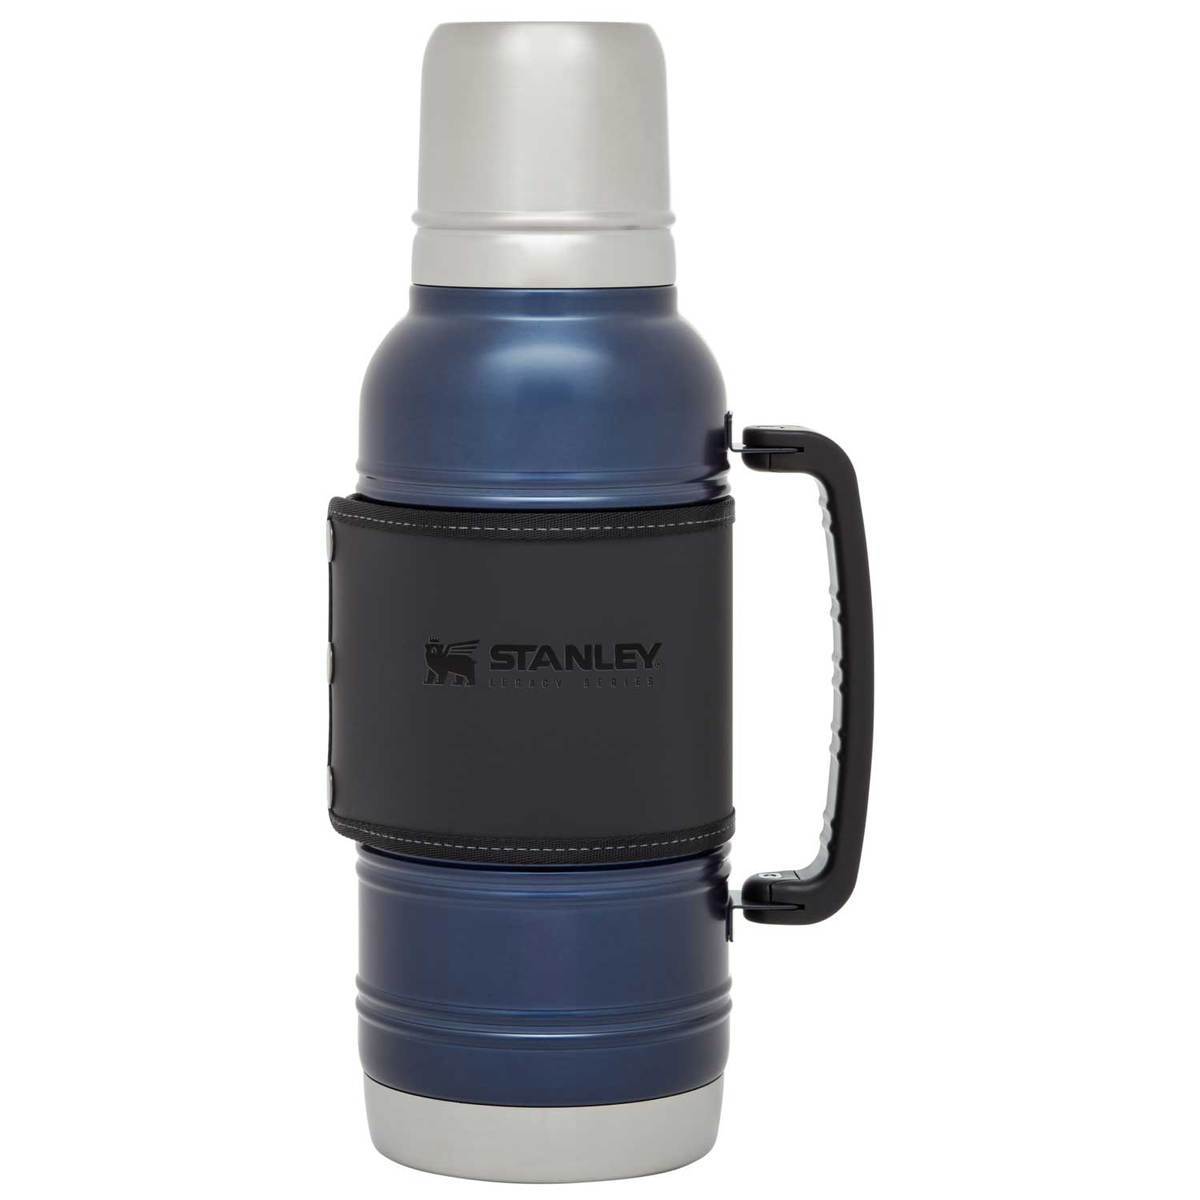 Stanley Classic Stainless Steel Vacuum Insulated Thermos Bottle, 1.5 qt